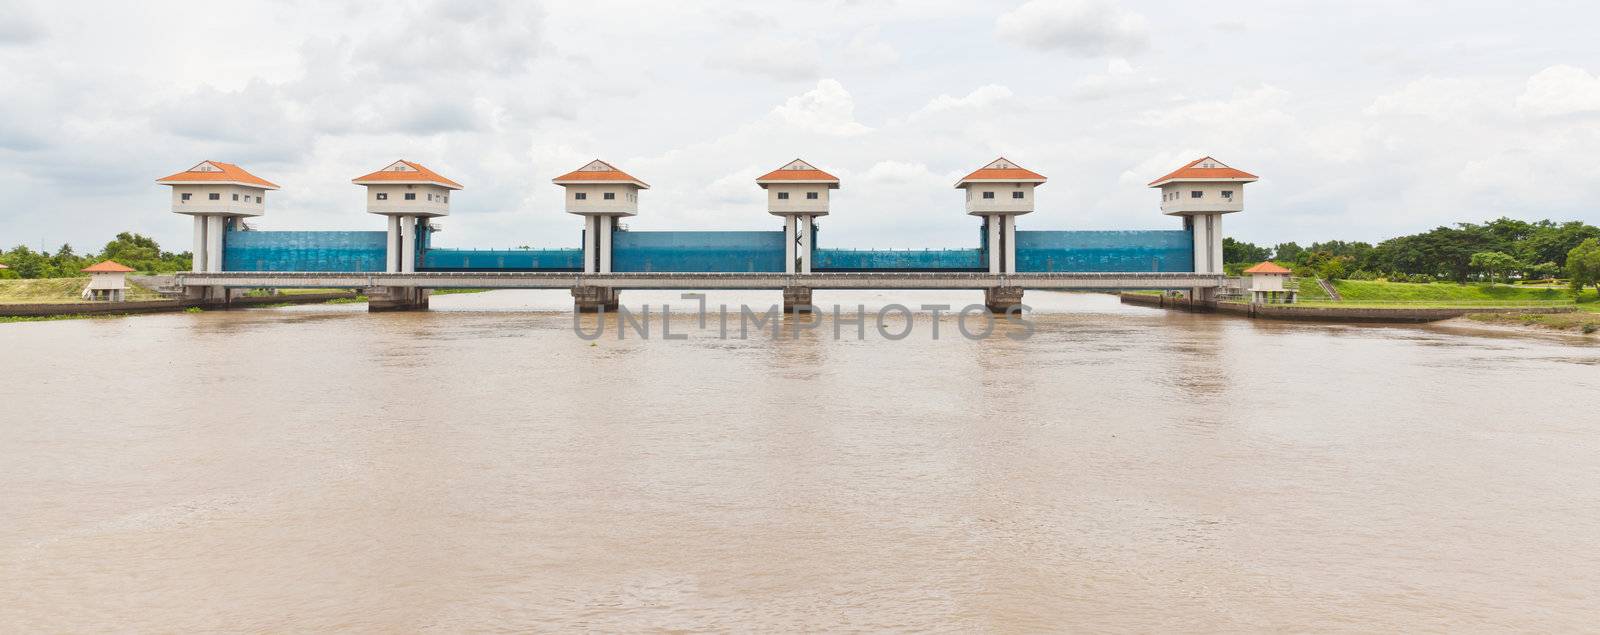 The water gate of BangPaKong River in Thailand